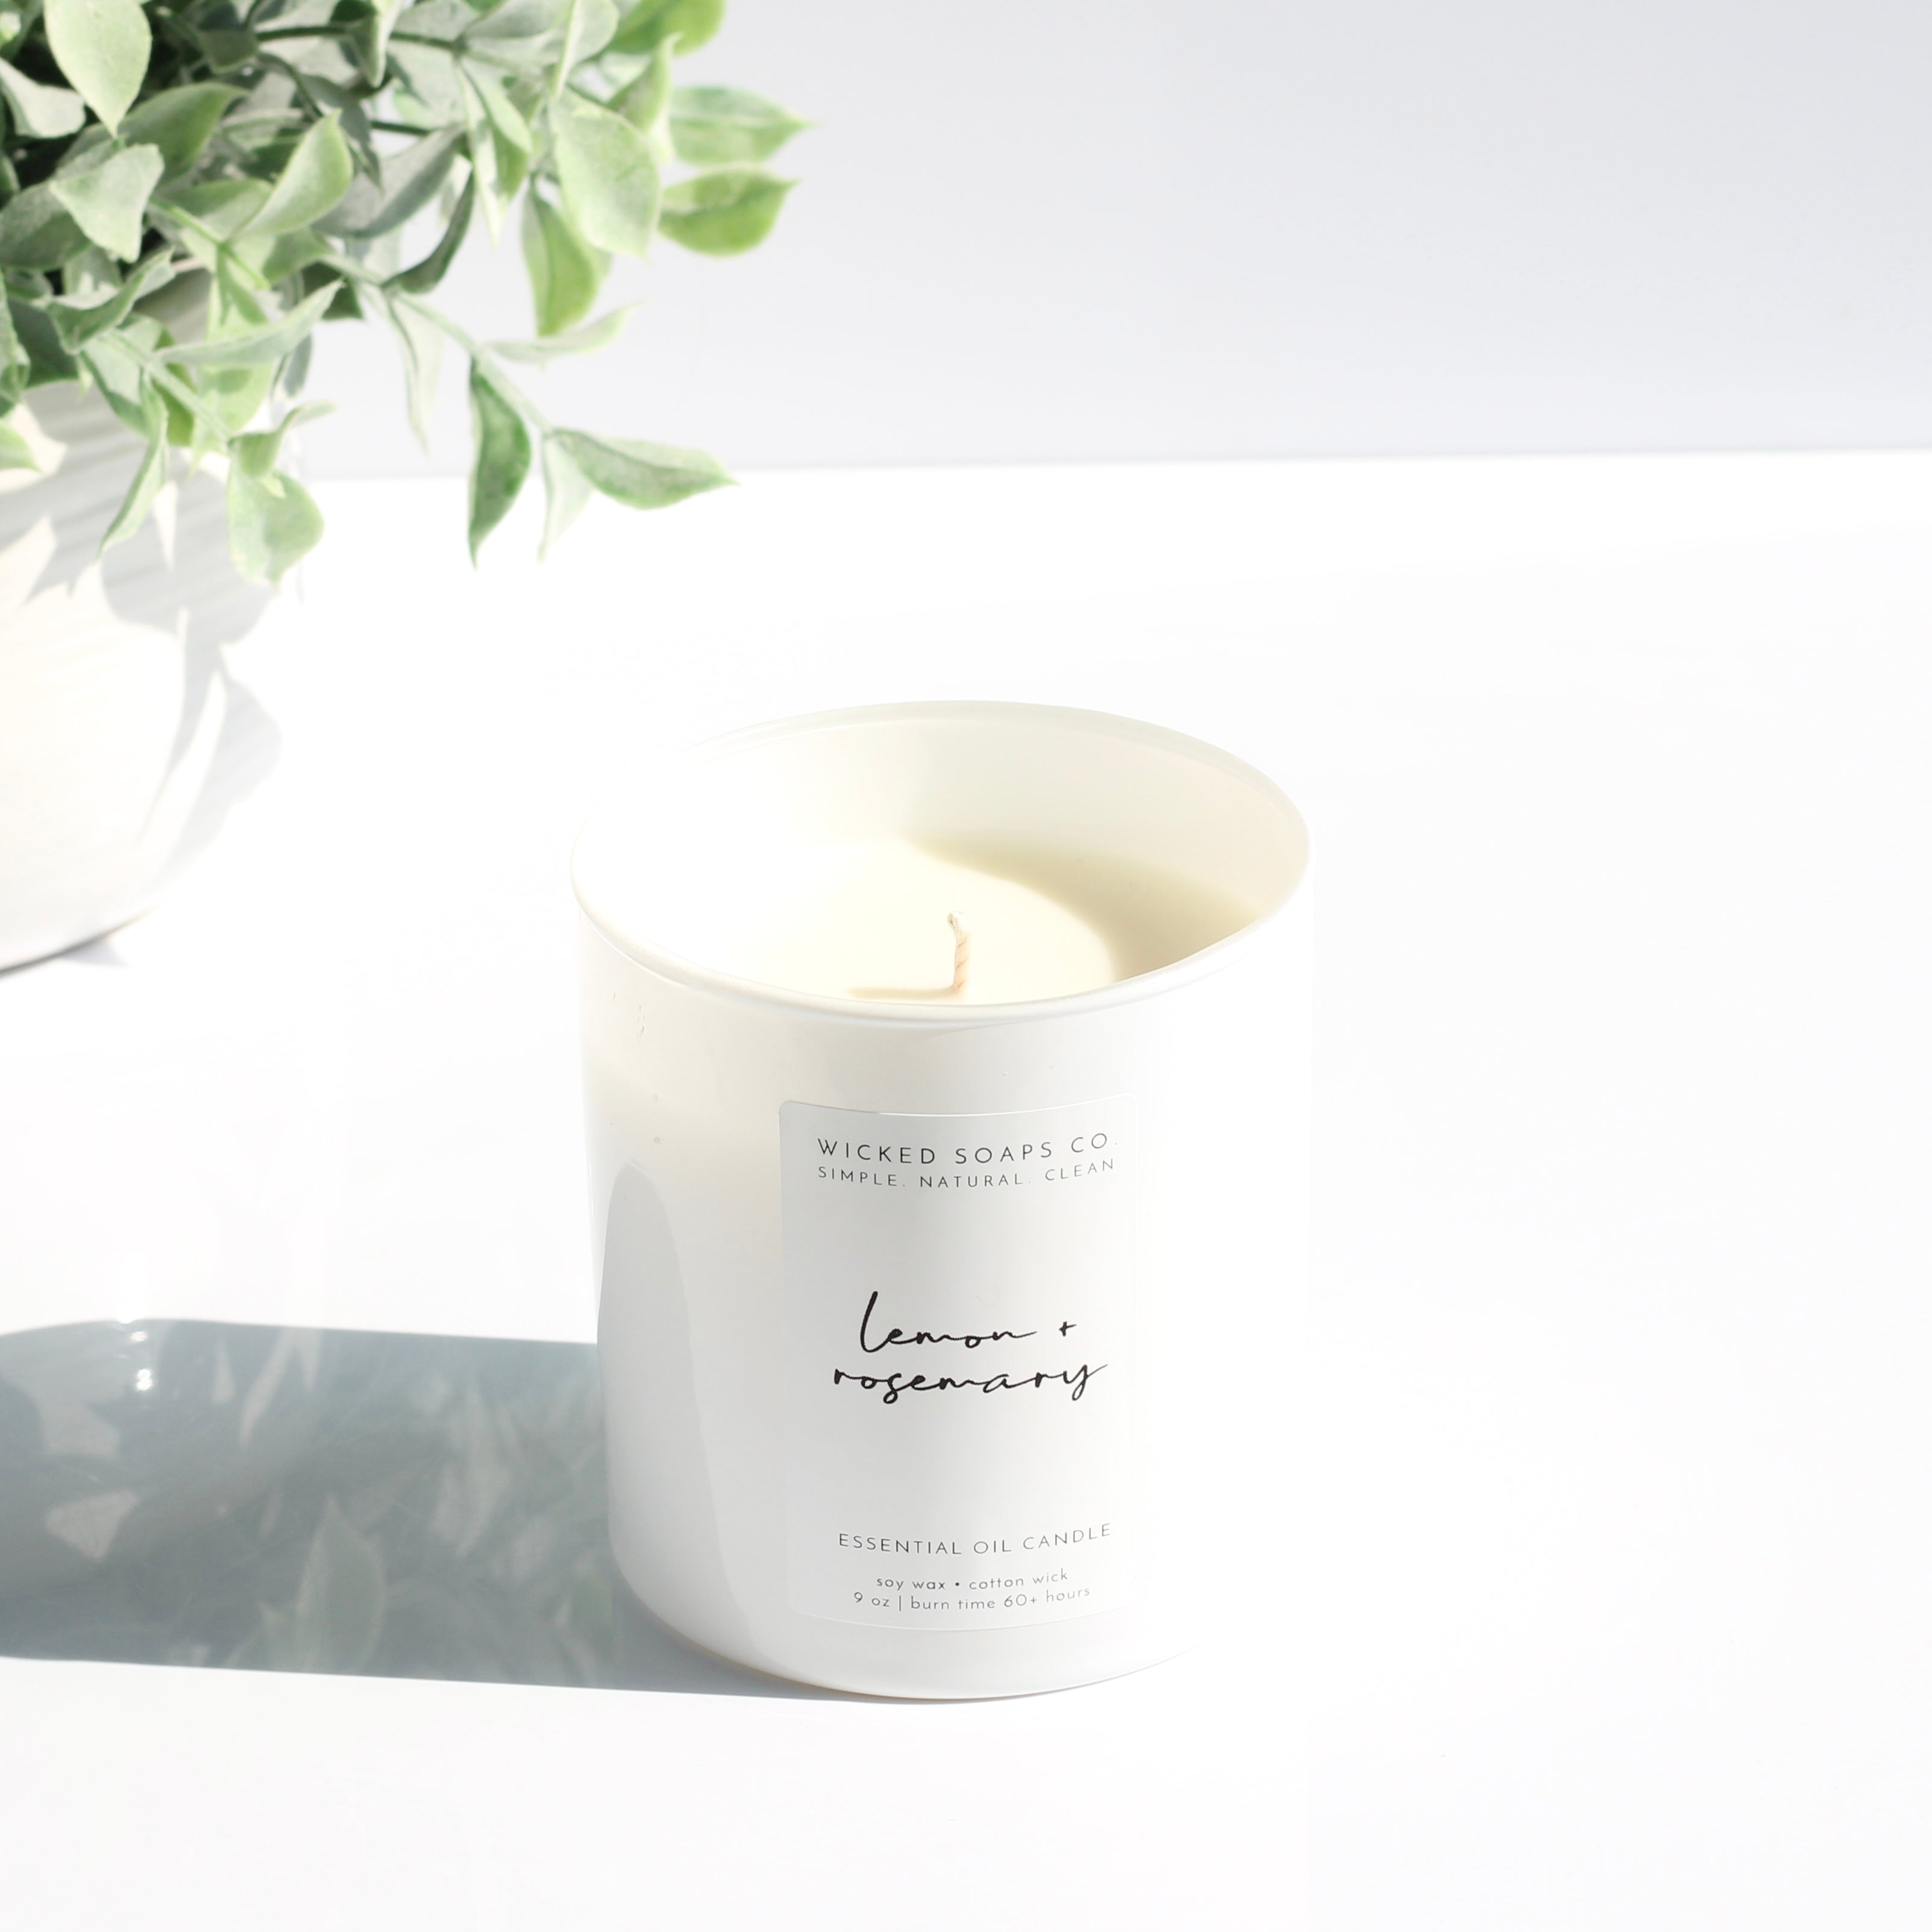 Lemon + Rosemary Essential Oil Candle